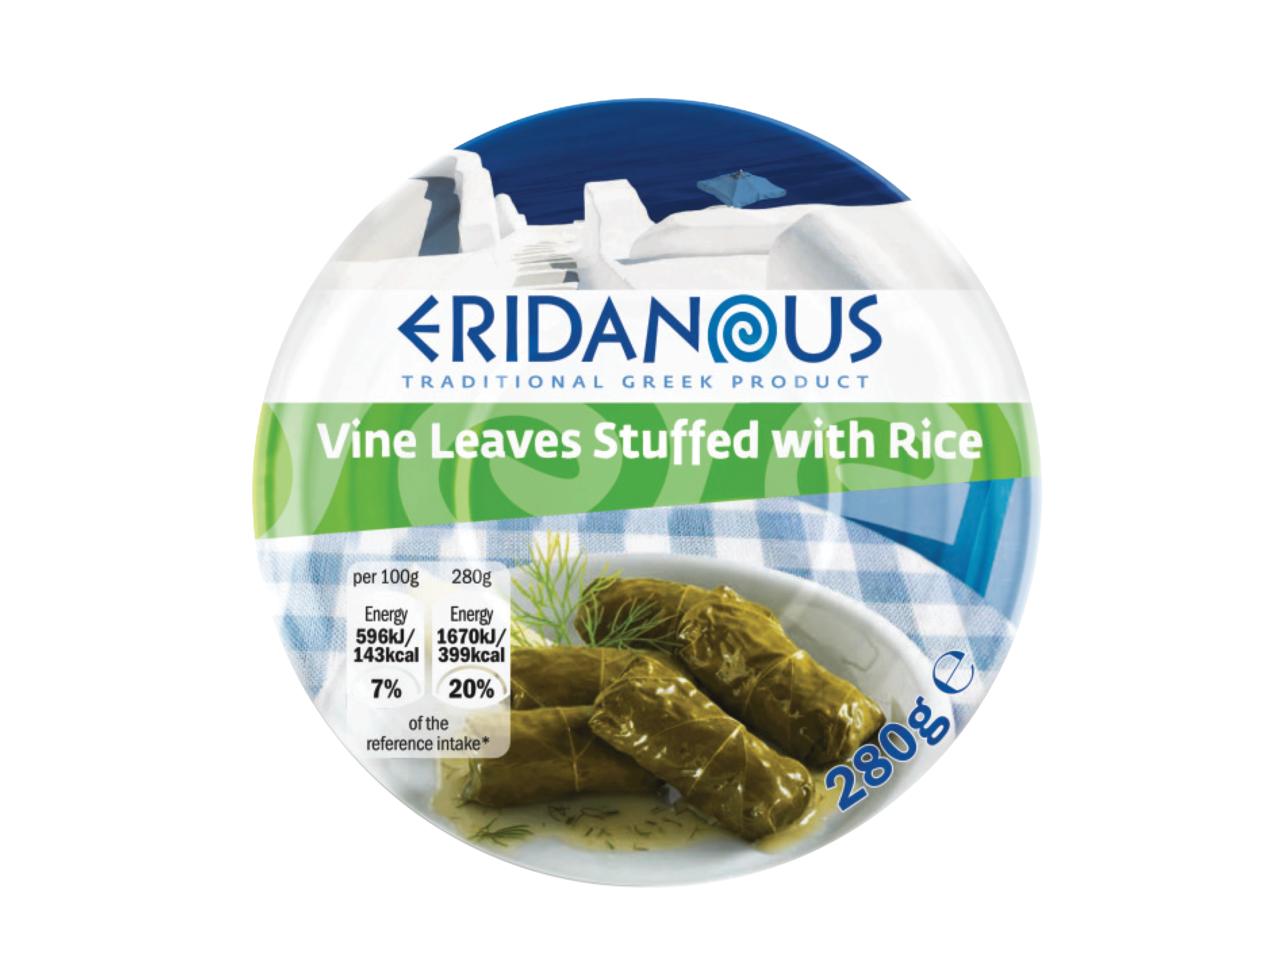 Vine Leaves stuffed with Rice